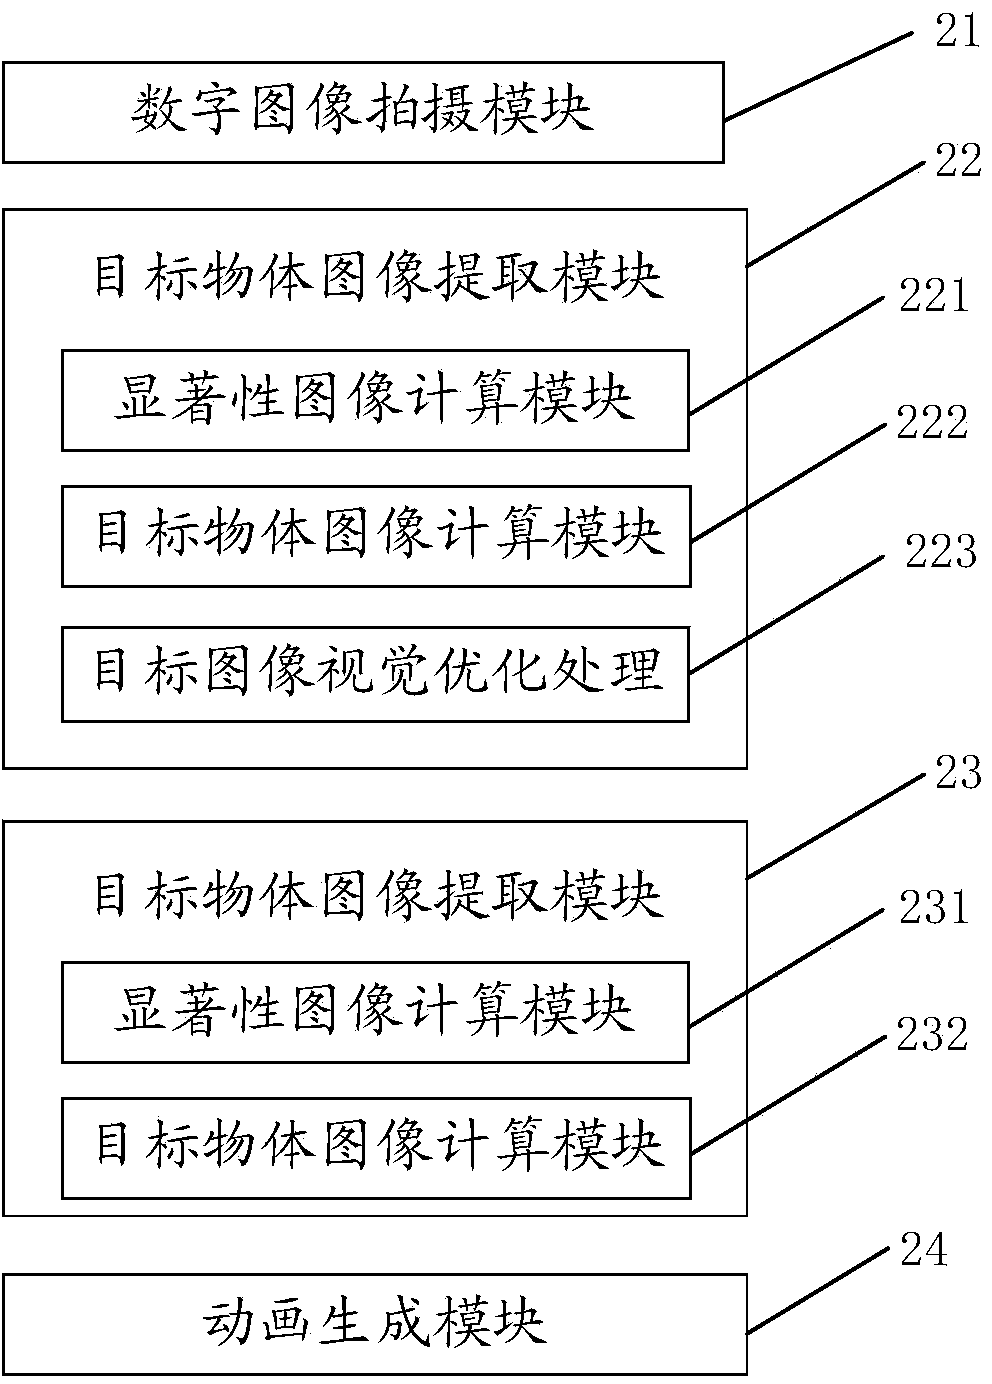 Method and device for extracting and continuously playing target object images in a set of images